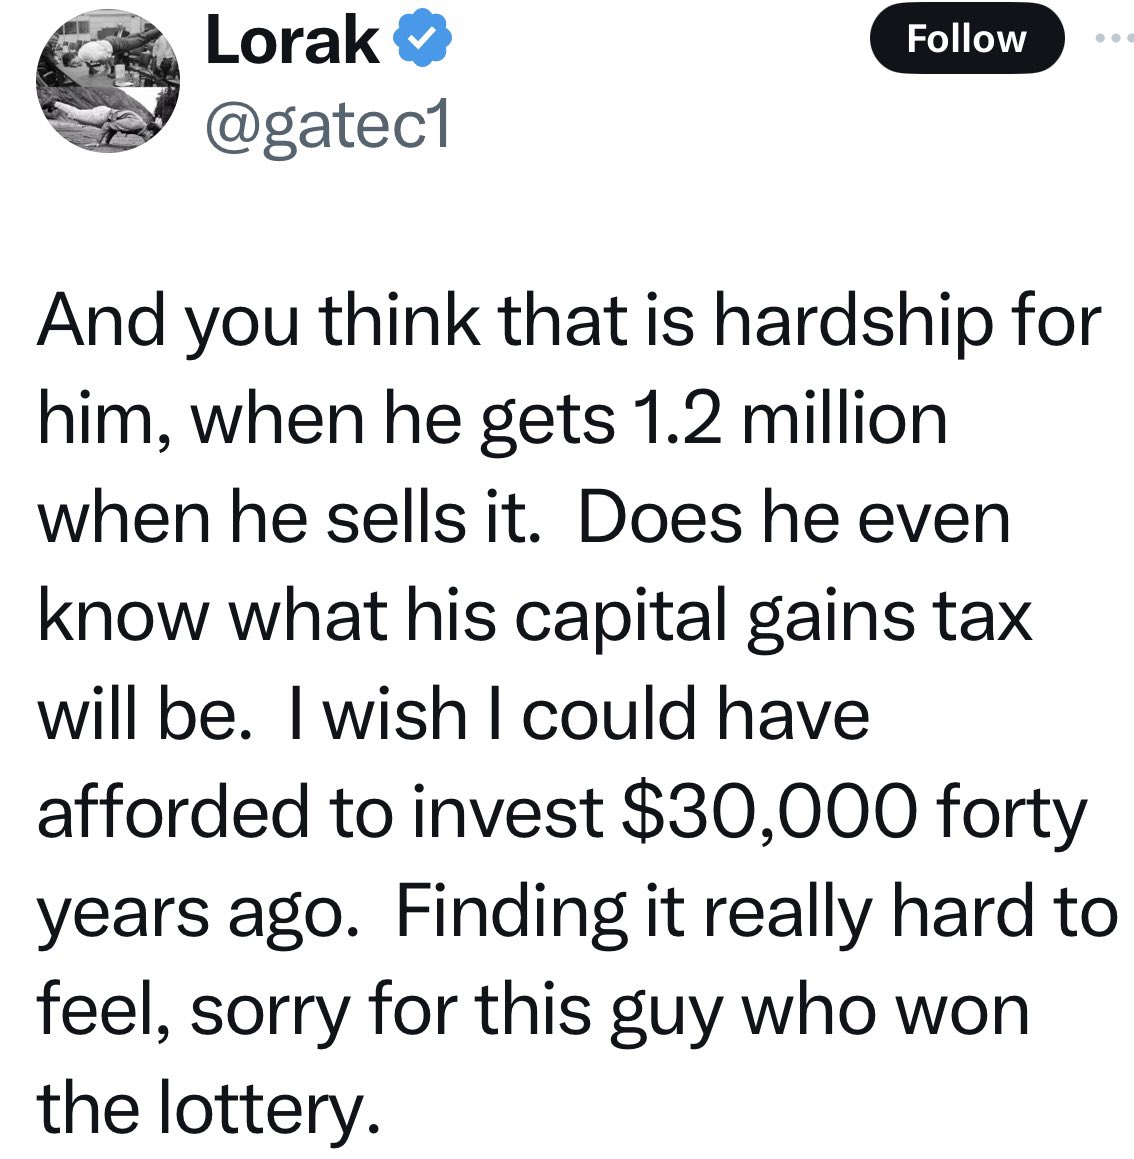 You’re a fucking socialist hack! You think it’s fair to STEAL from people that work hard to enjoy the life they created for themselves?!? Wait til they implement a capital gains tax on your primary residence, you’ll be singing a different tune. 
They’re coming after you next!